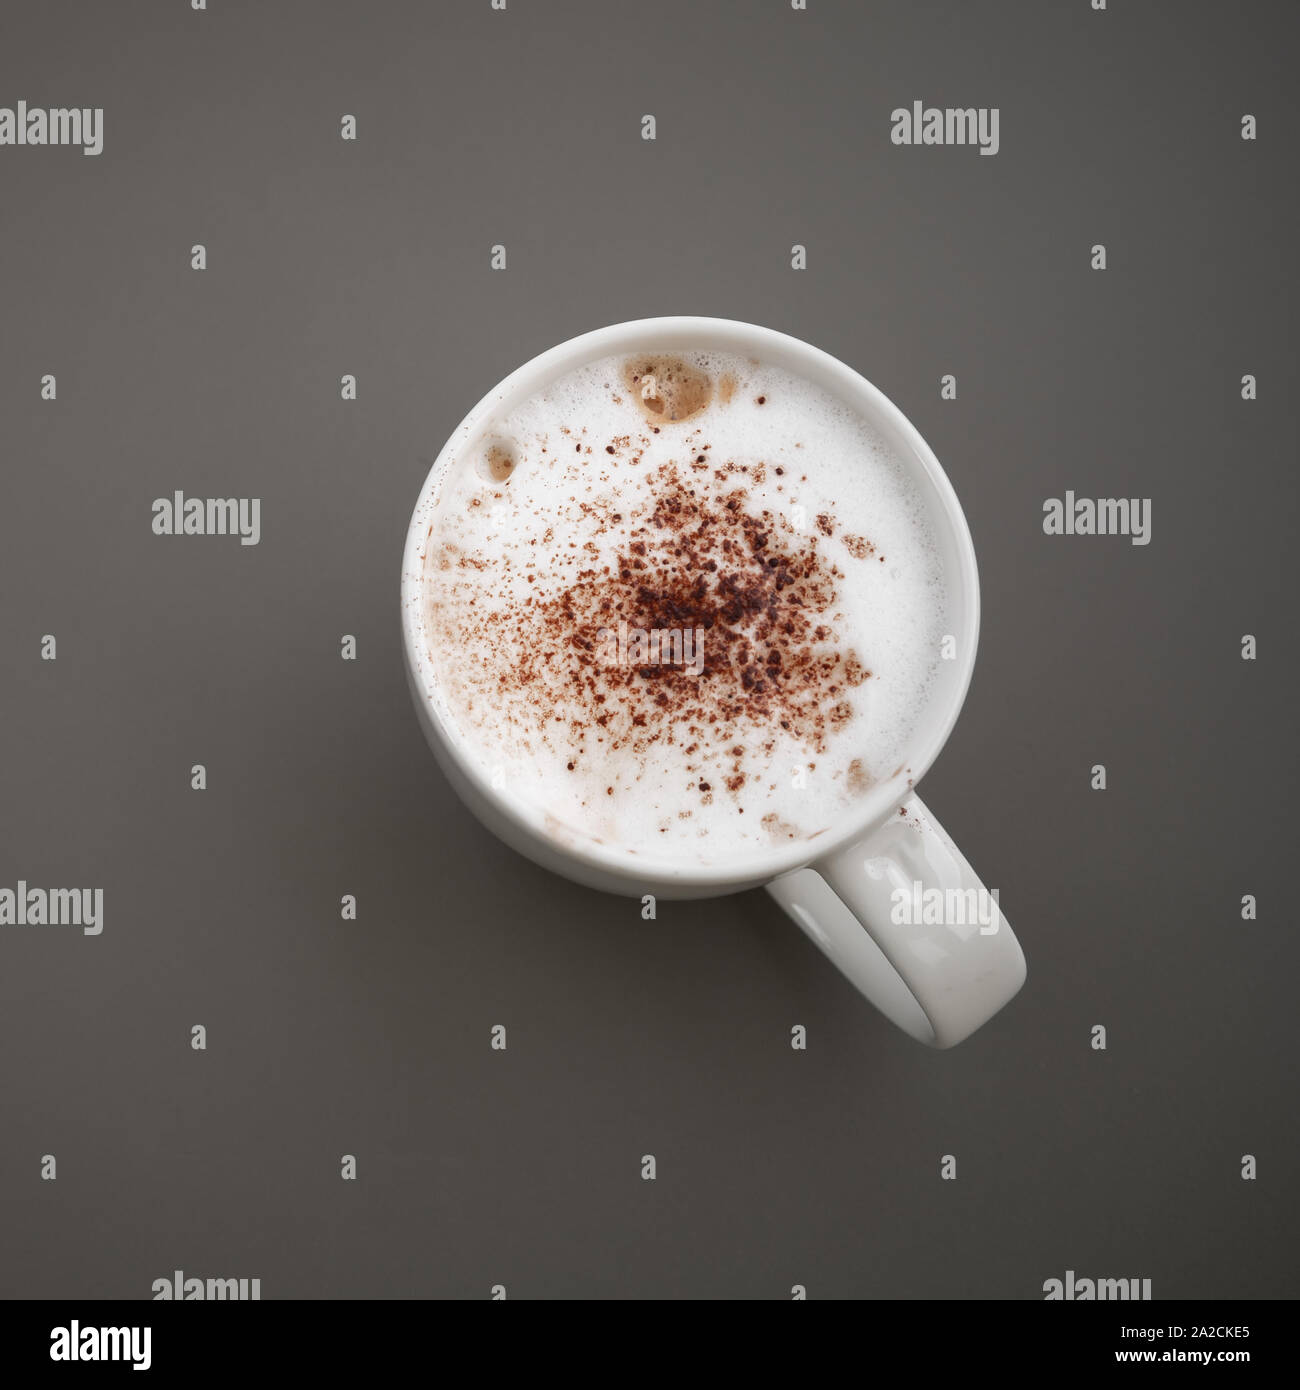 Cappuccino. Cup of coffee with milk foam and cinnamon stands on a gray table, top view. Close-up square photo Stock Photo